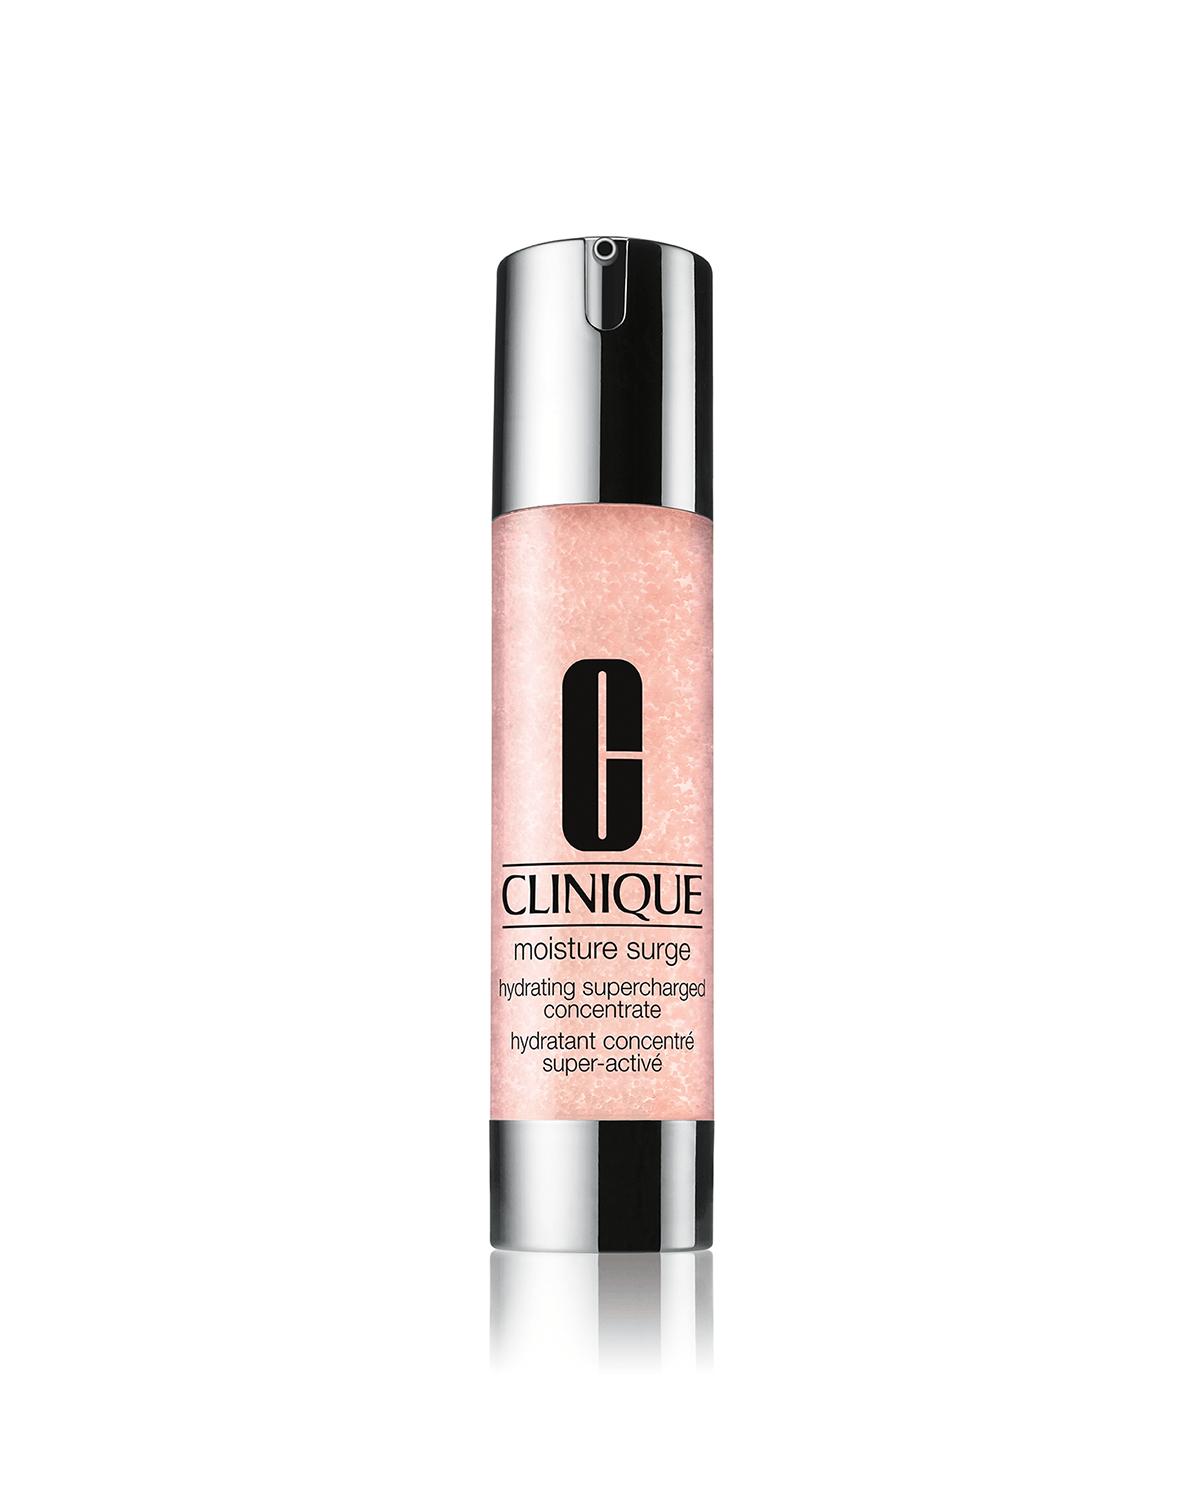 Jumbo Moisture Surge™ Hydrating Supercharged Concentrate